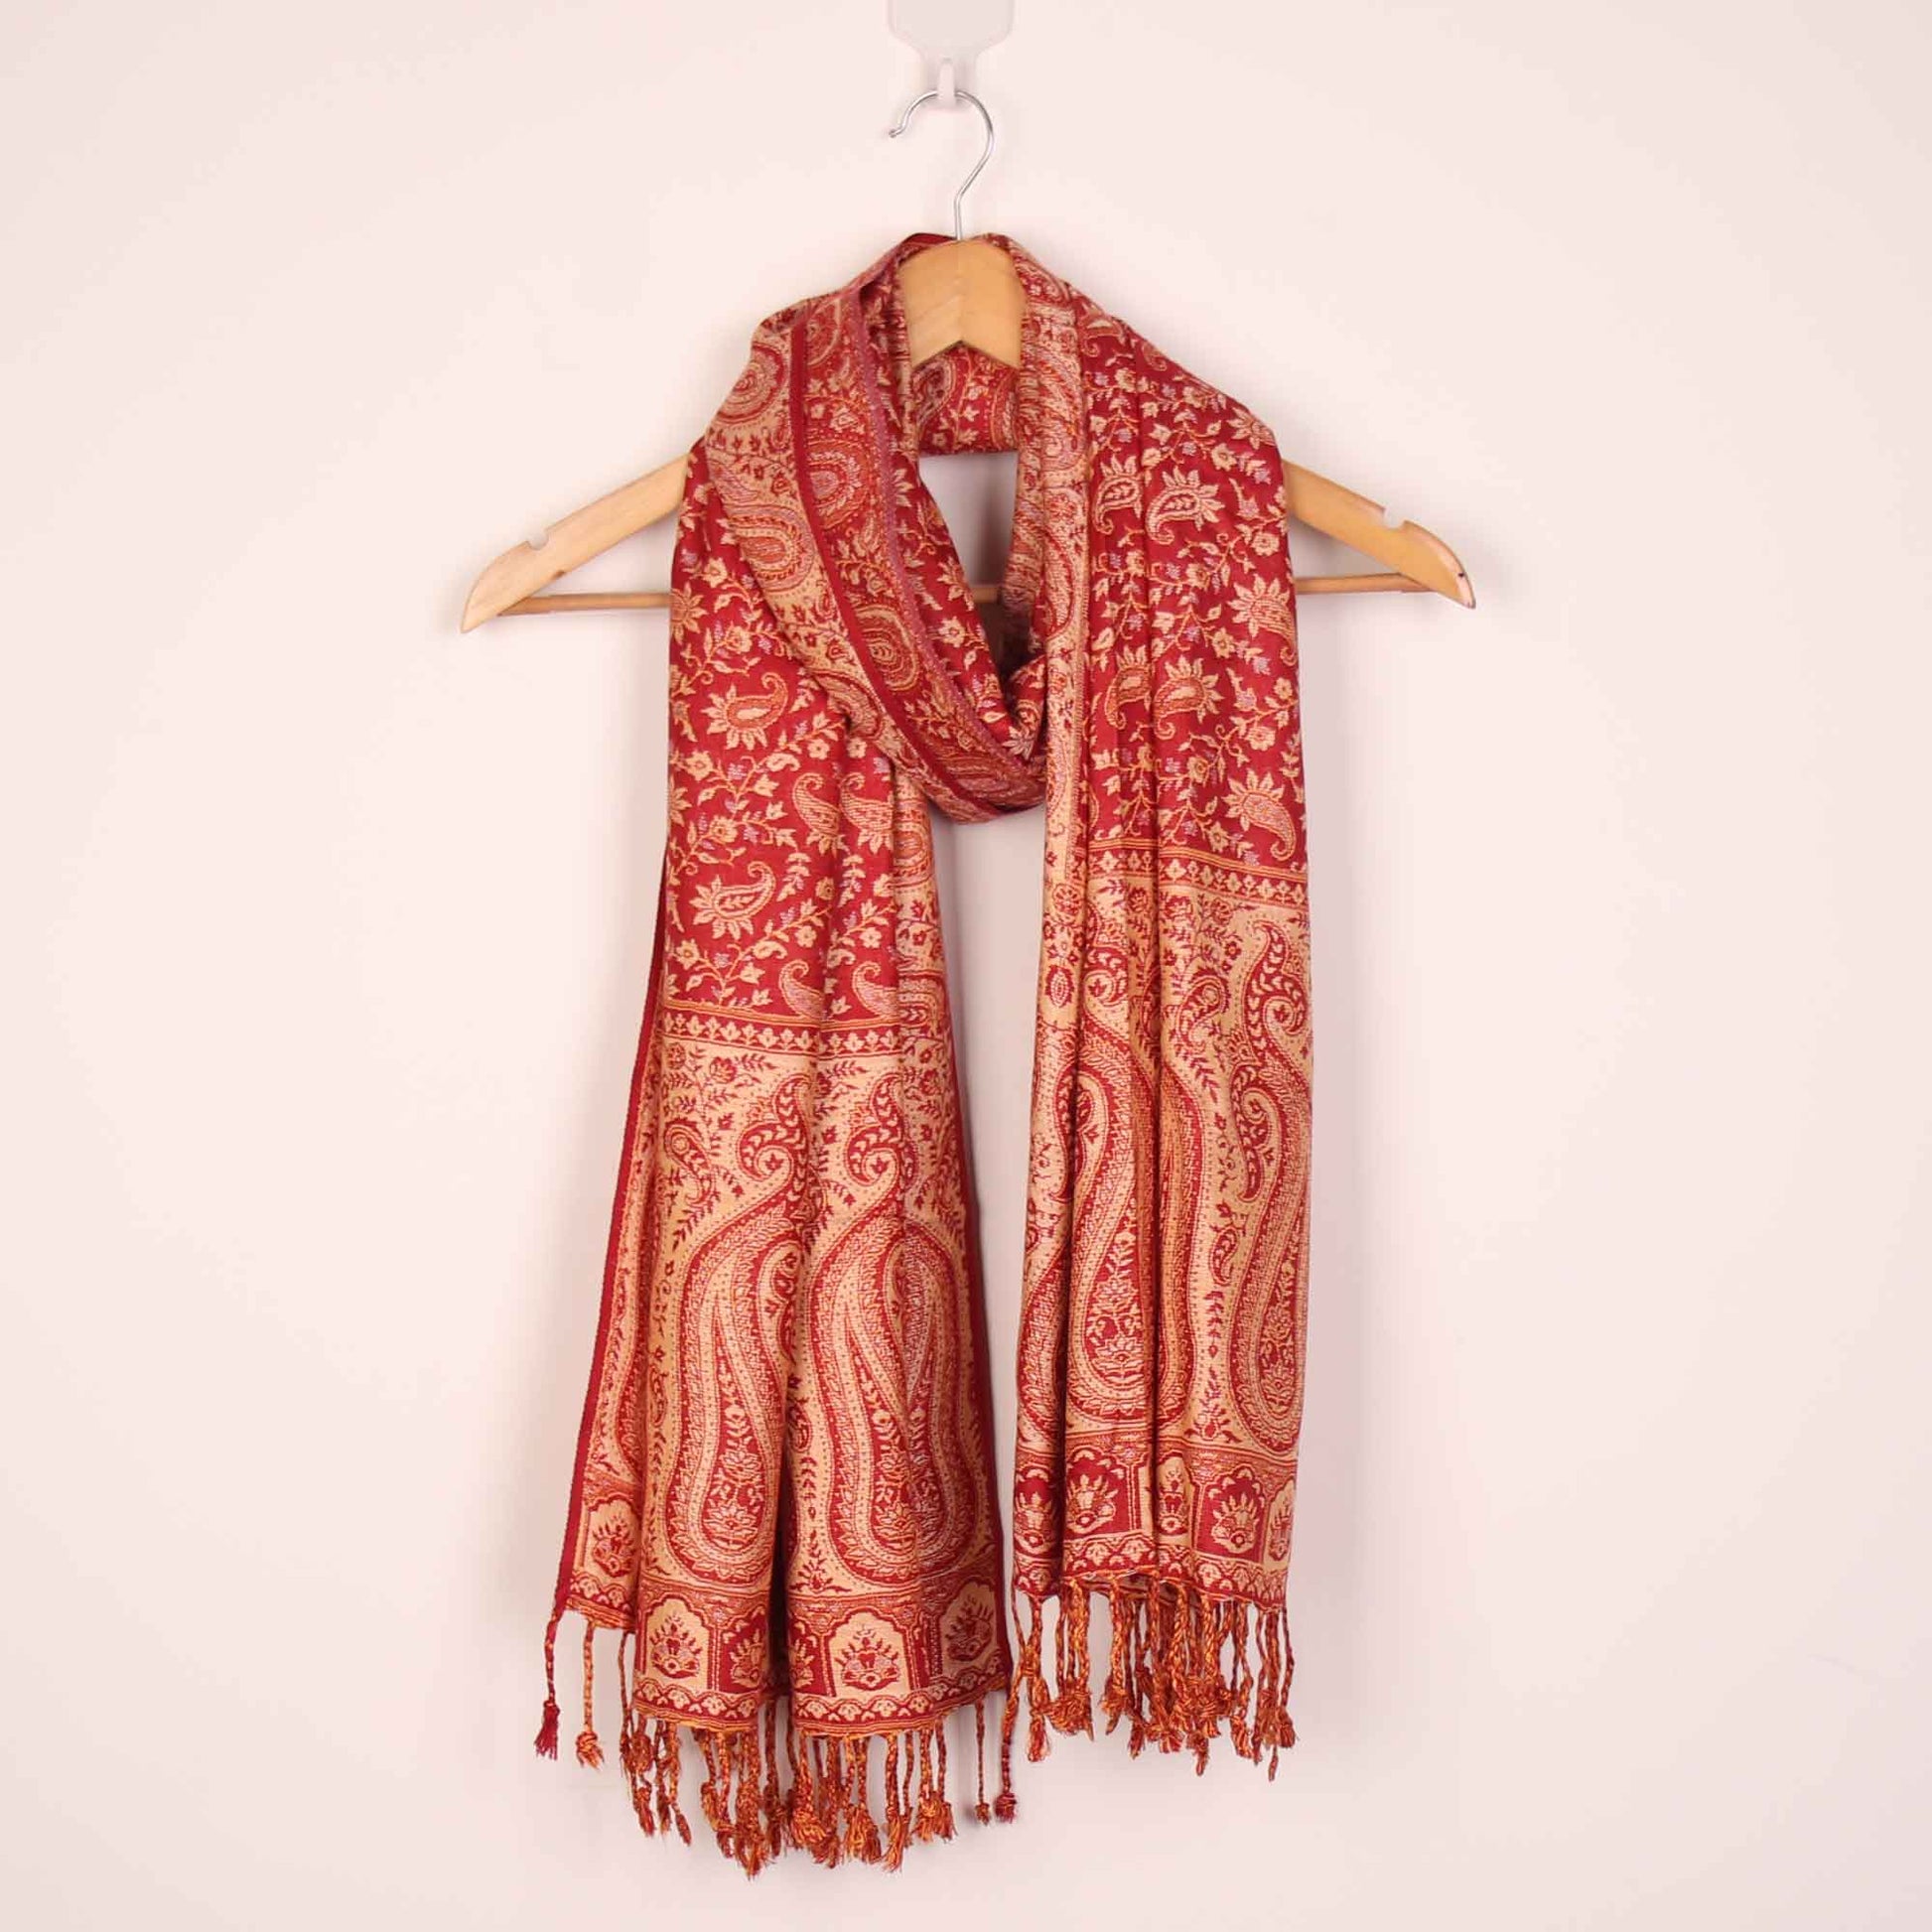 Stole,The Sultani Art Reversible Stole in Red - Cippele Multi Store